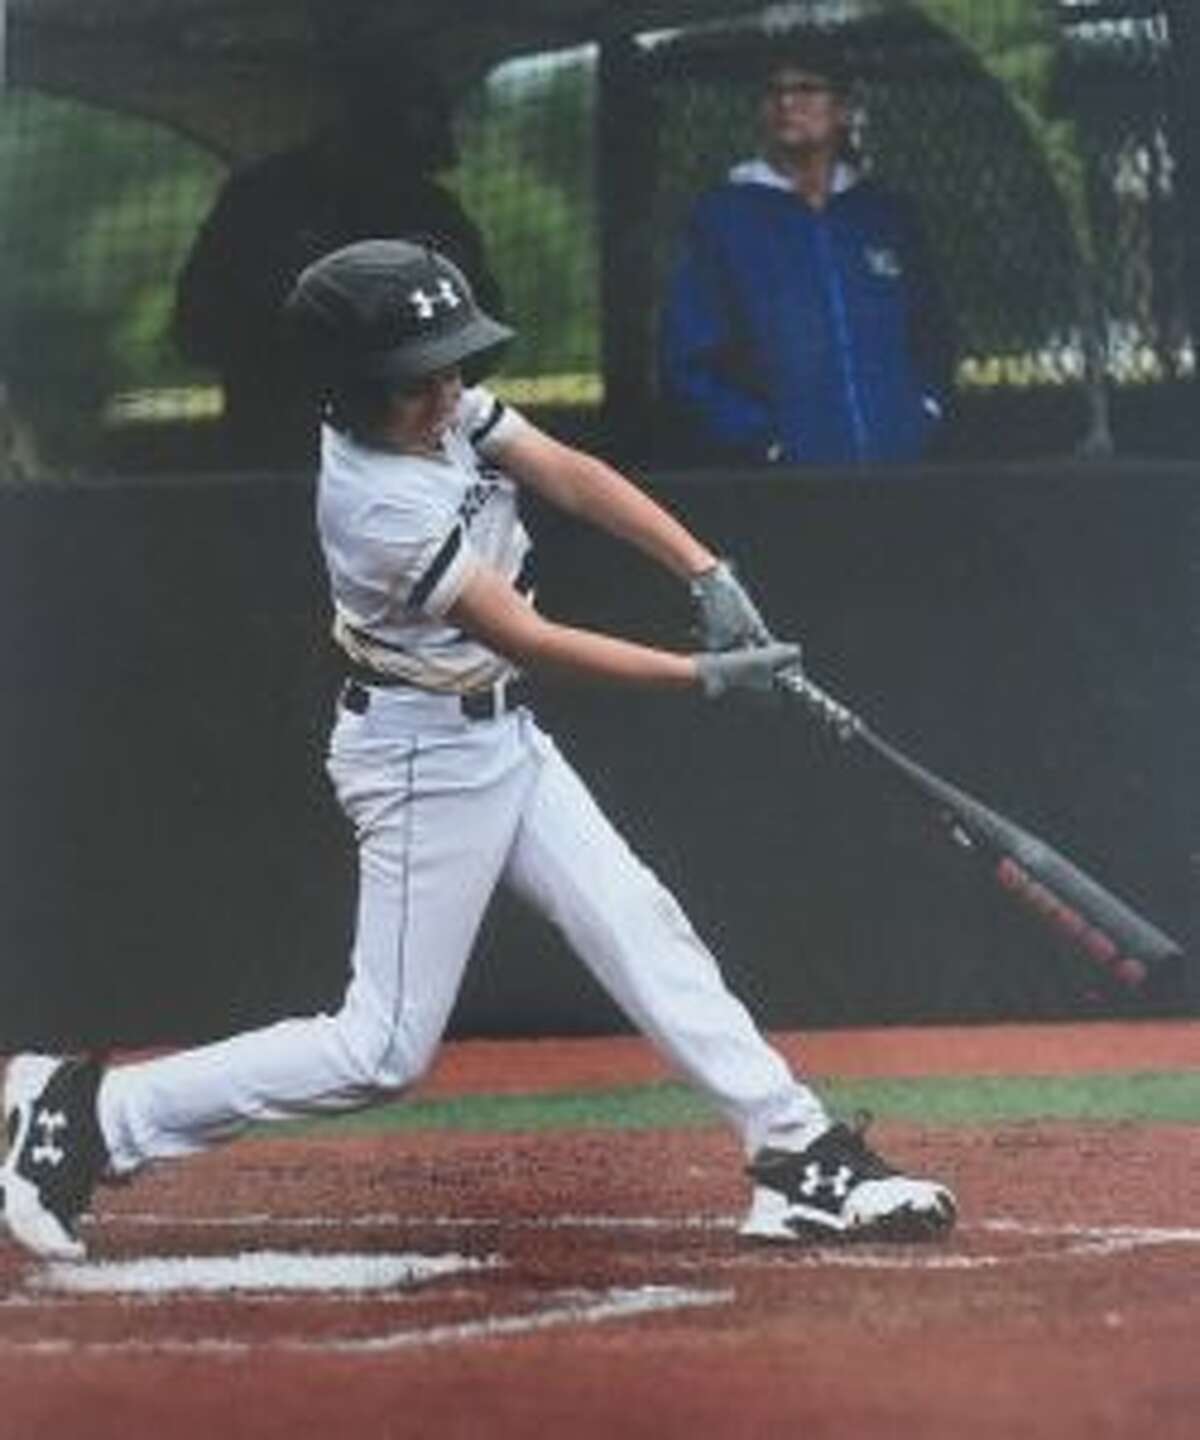 Andrew Valentino was selected to play for the U9 Northeast Region team at the All American Games.